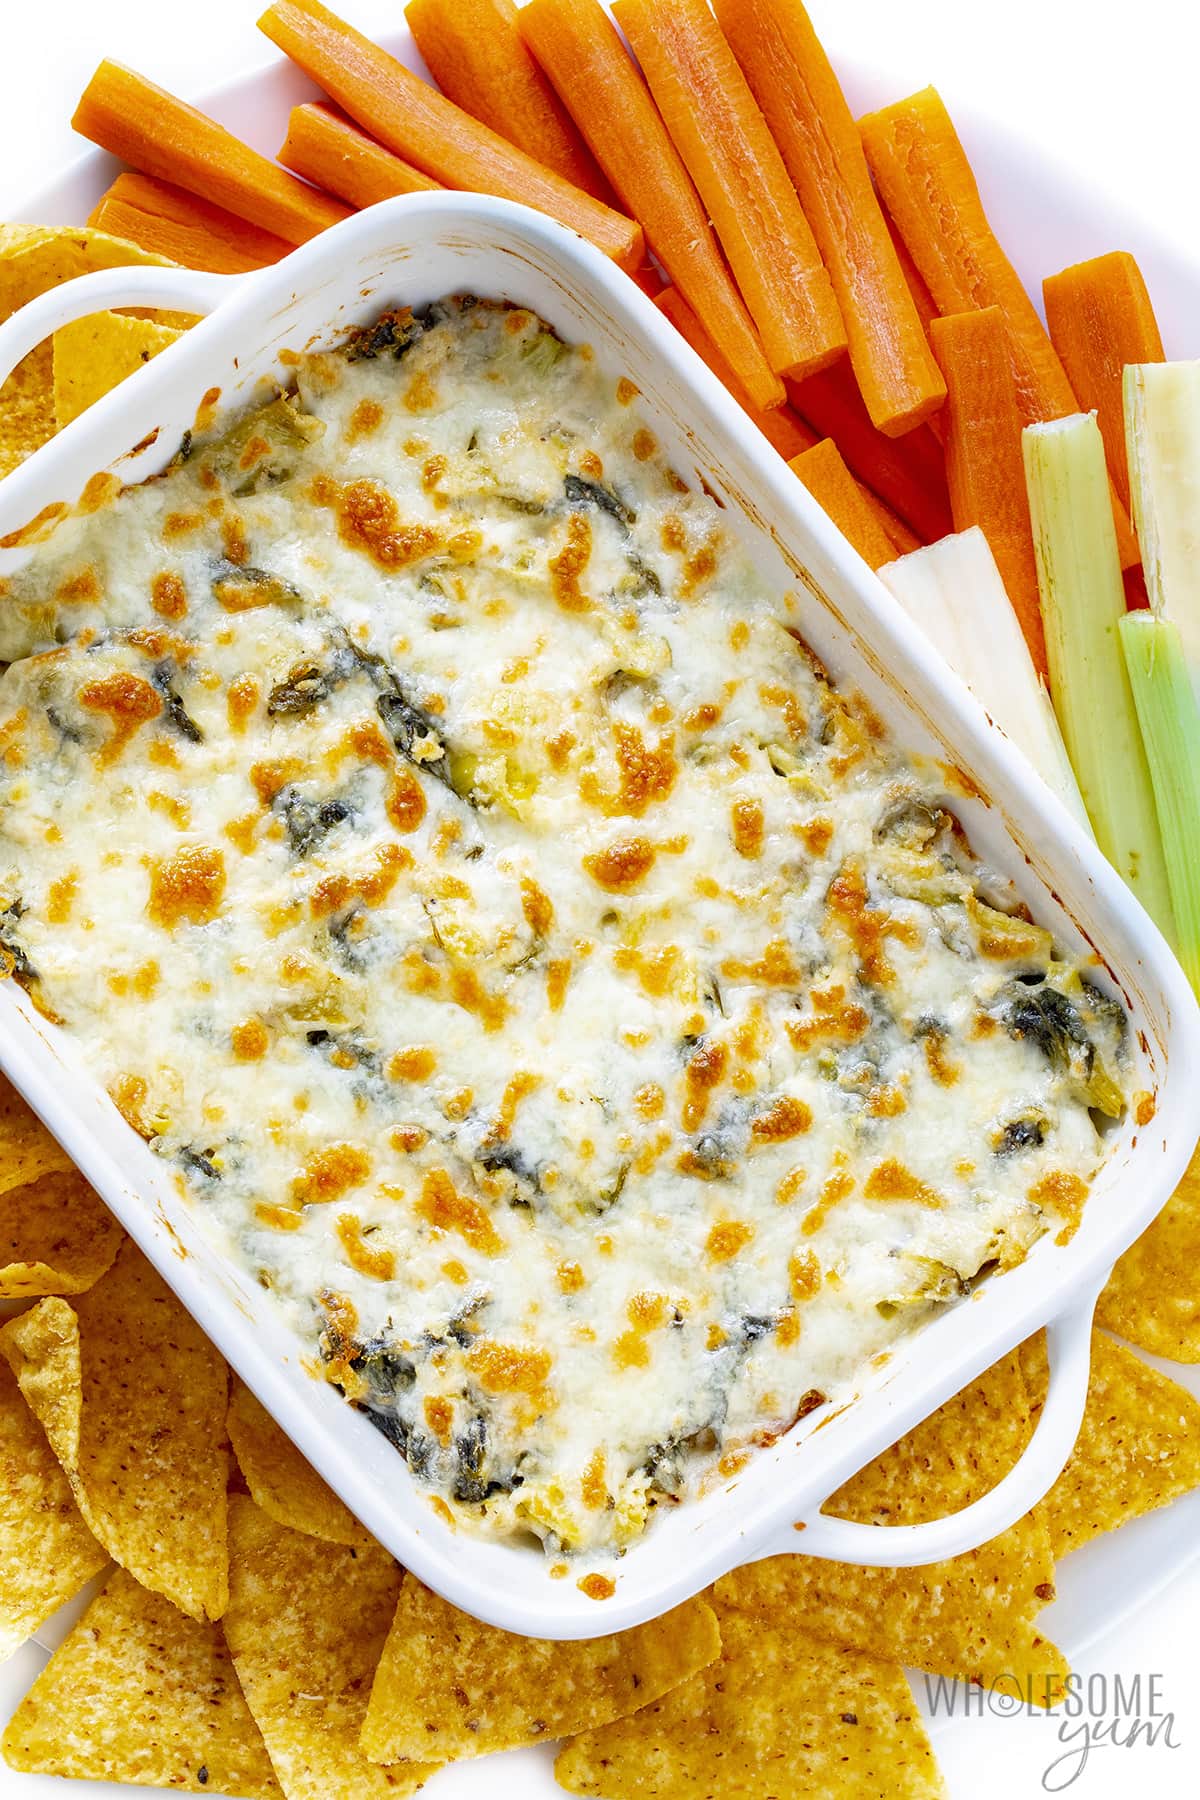 Roasted spinach artichoke dip surrounded by carrots, celery and cornflakes.